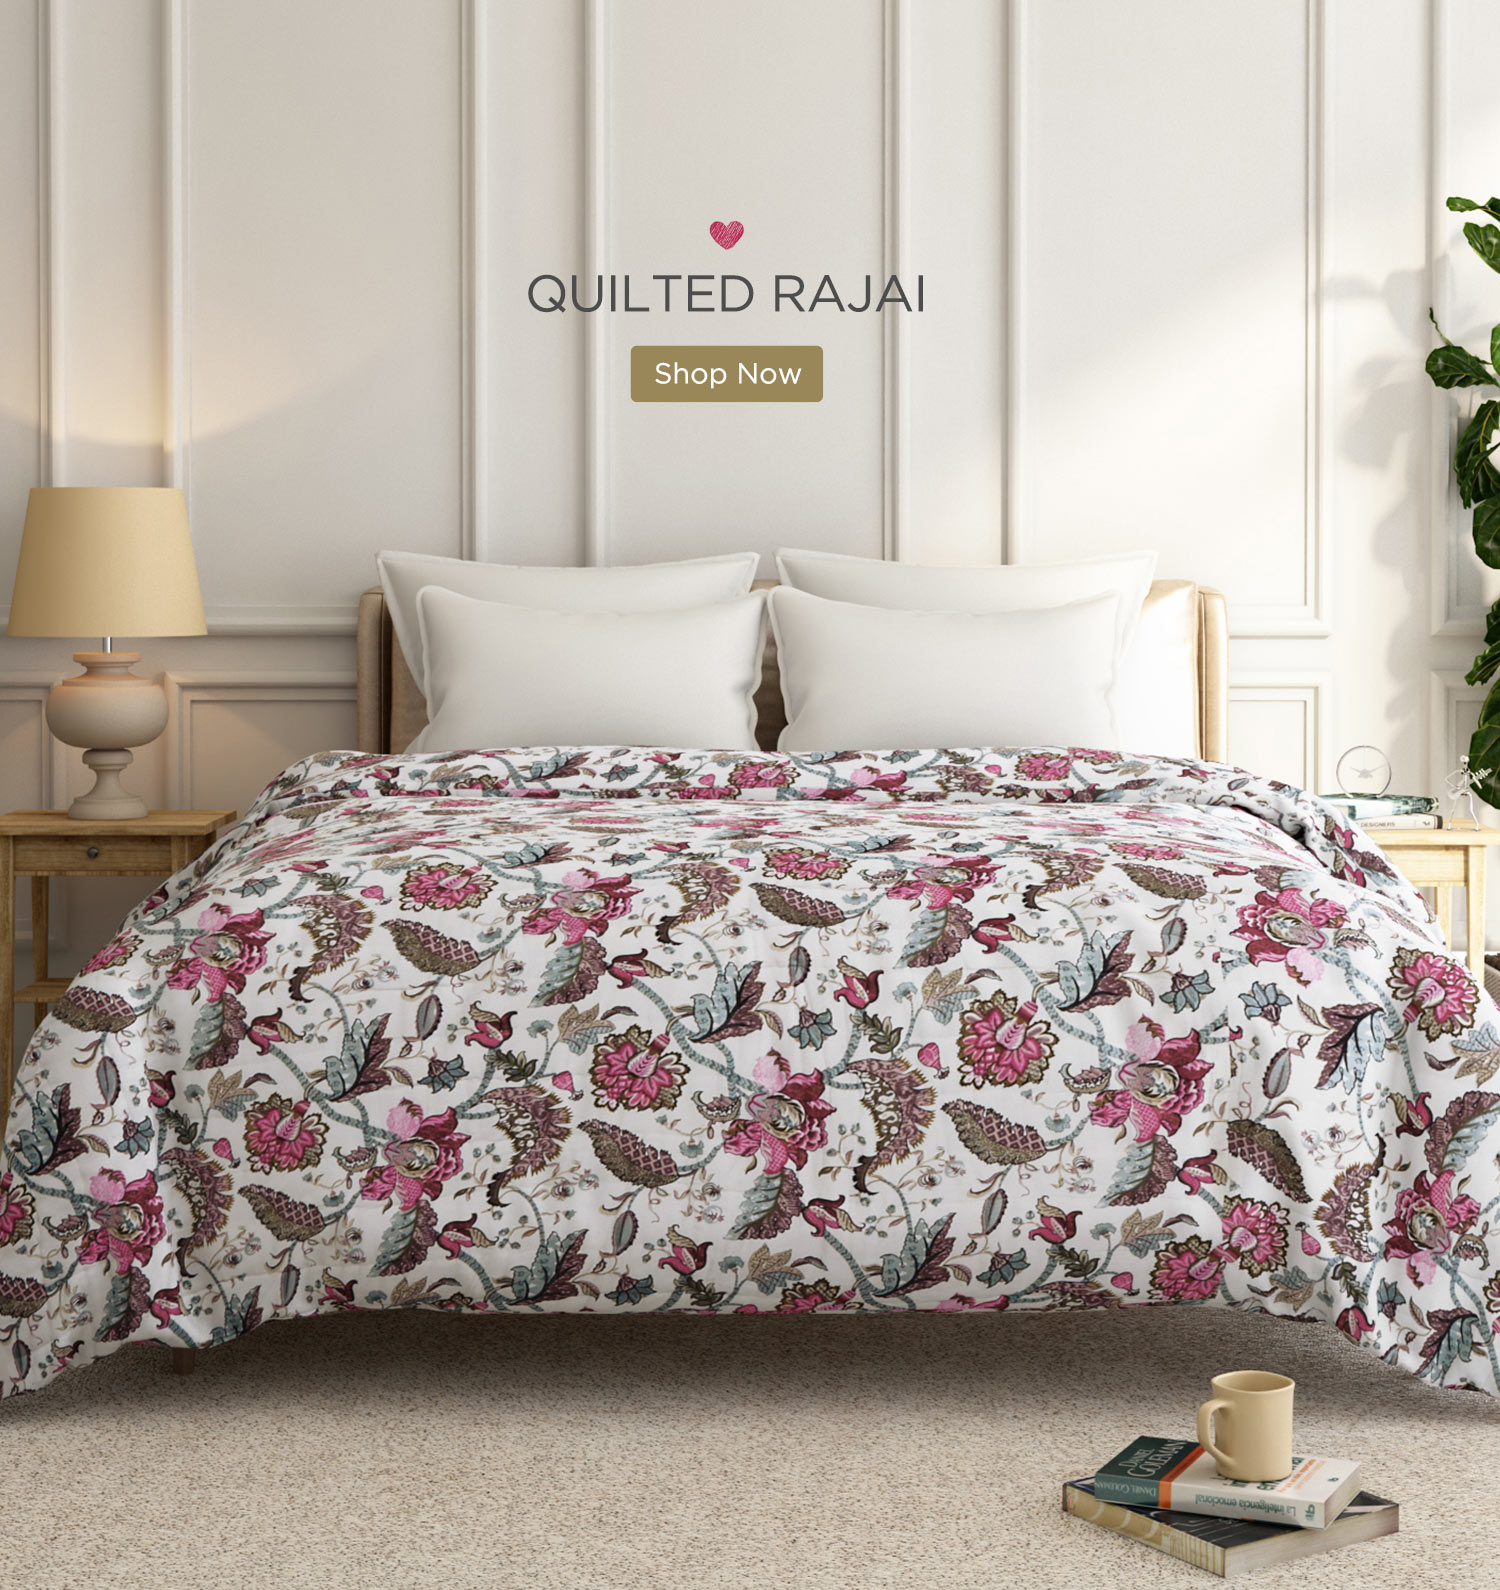 Buy Bedding Products Online